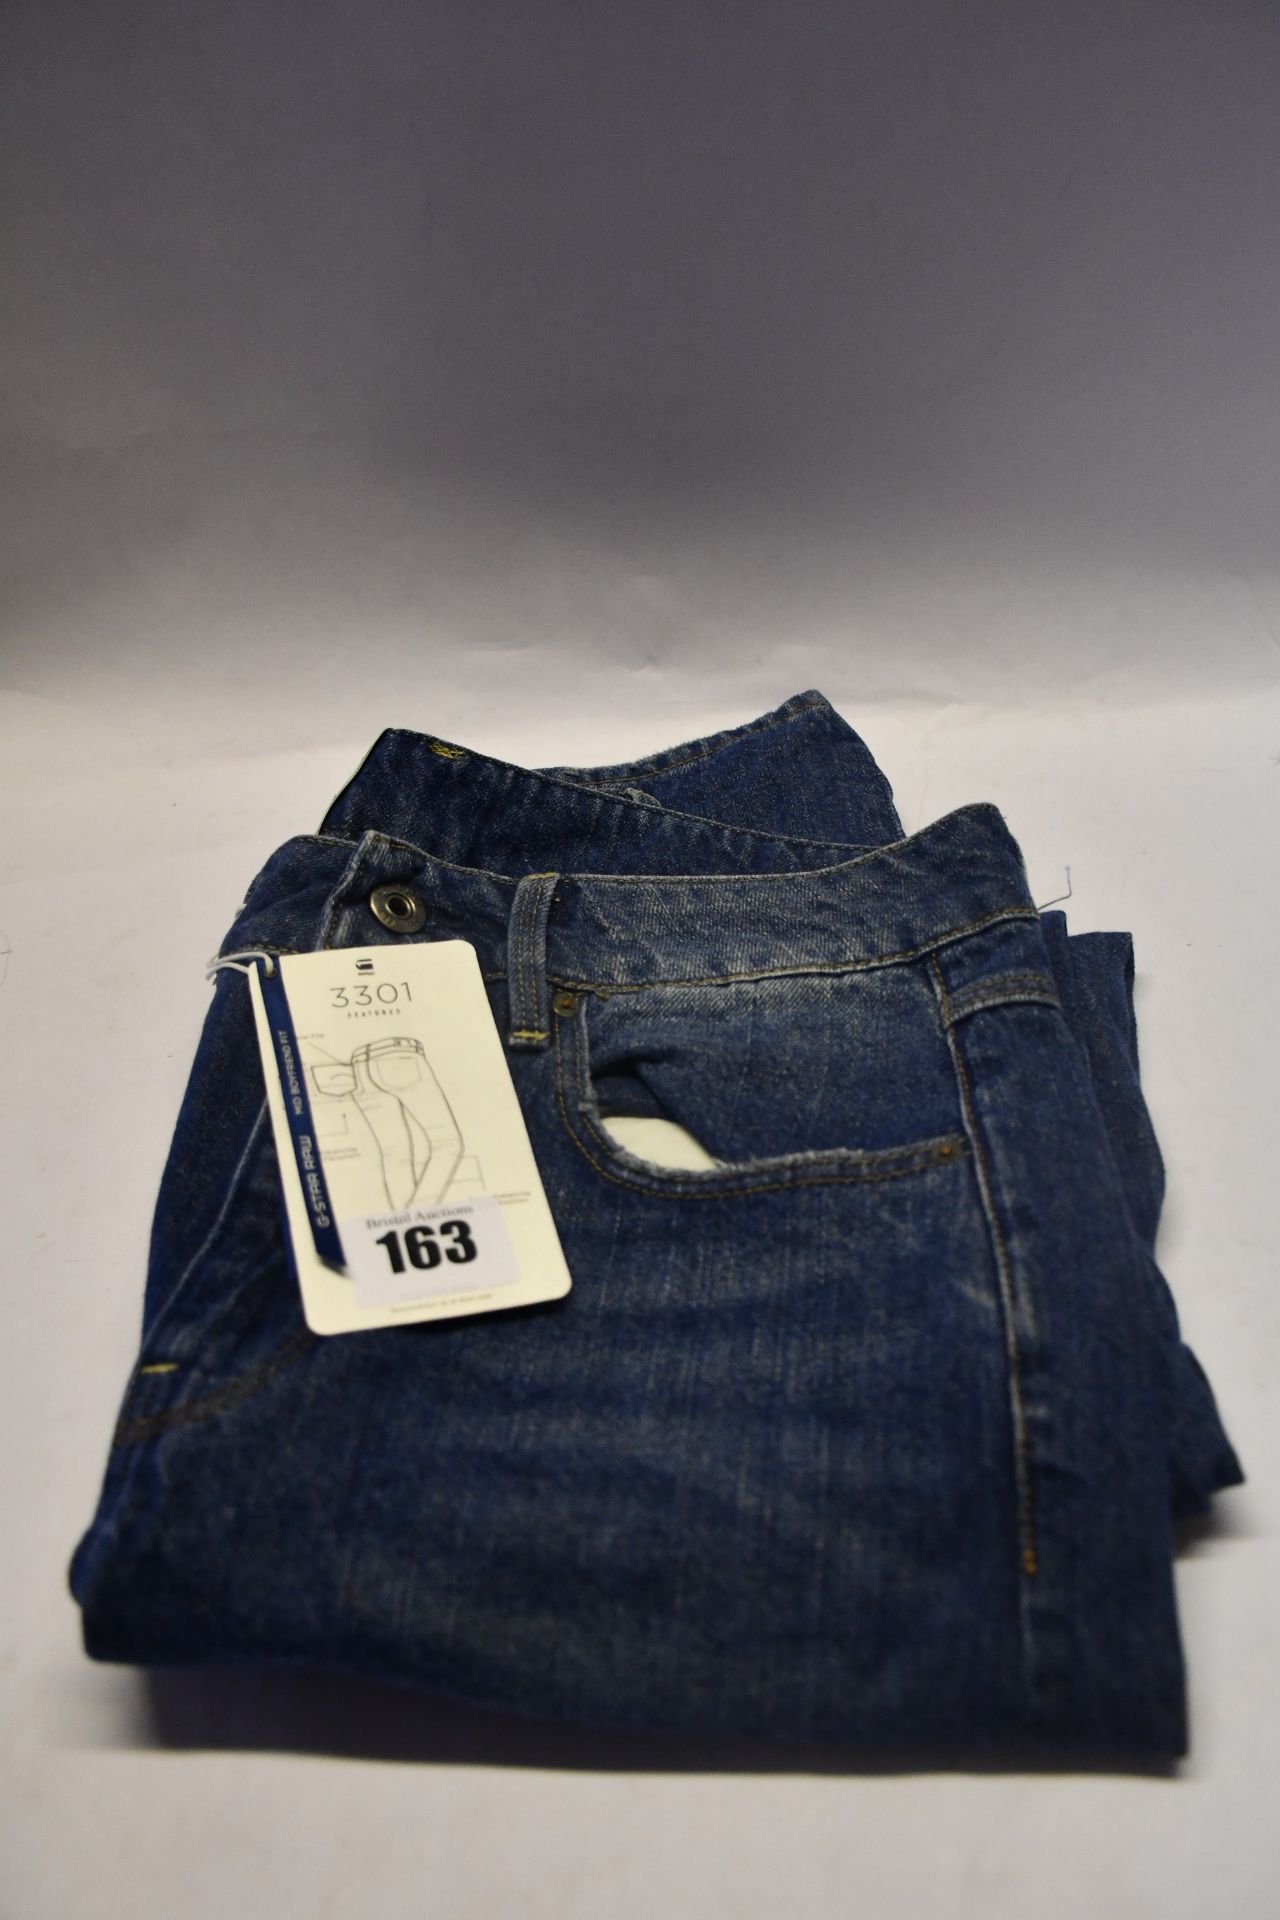 A pair of as new G-Star Saddle Boyfriend jeans (W24/L32 - RRP £105).